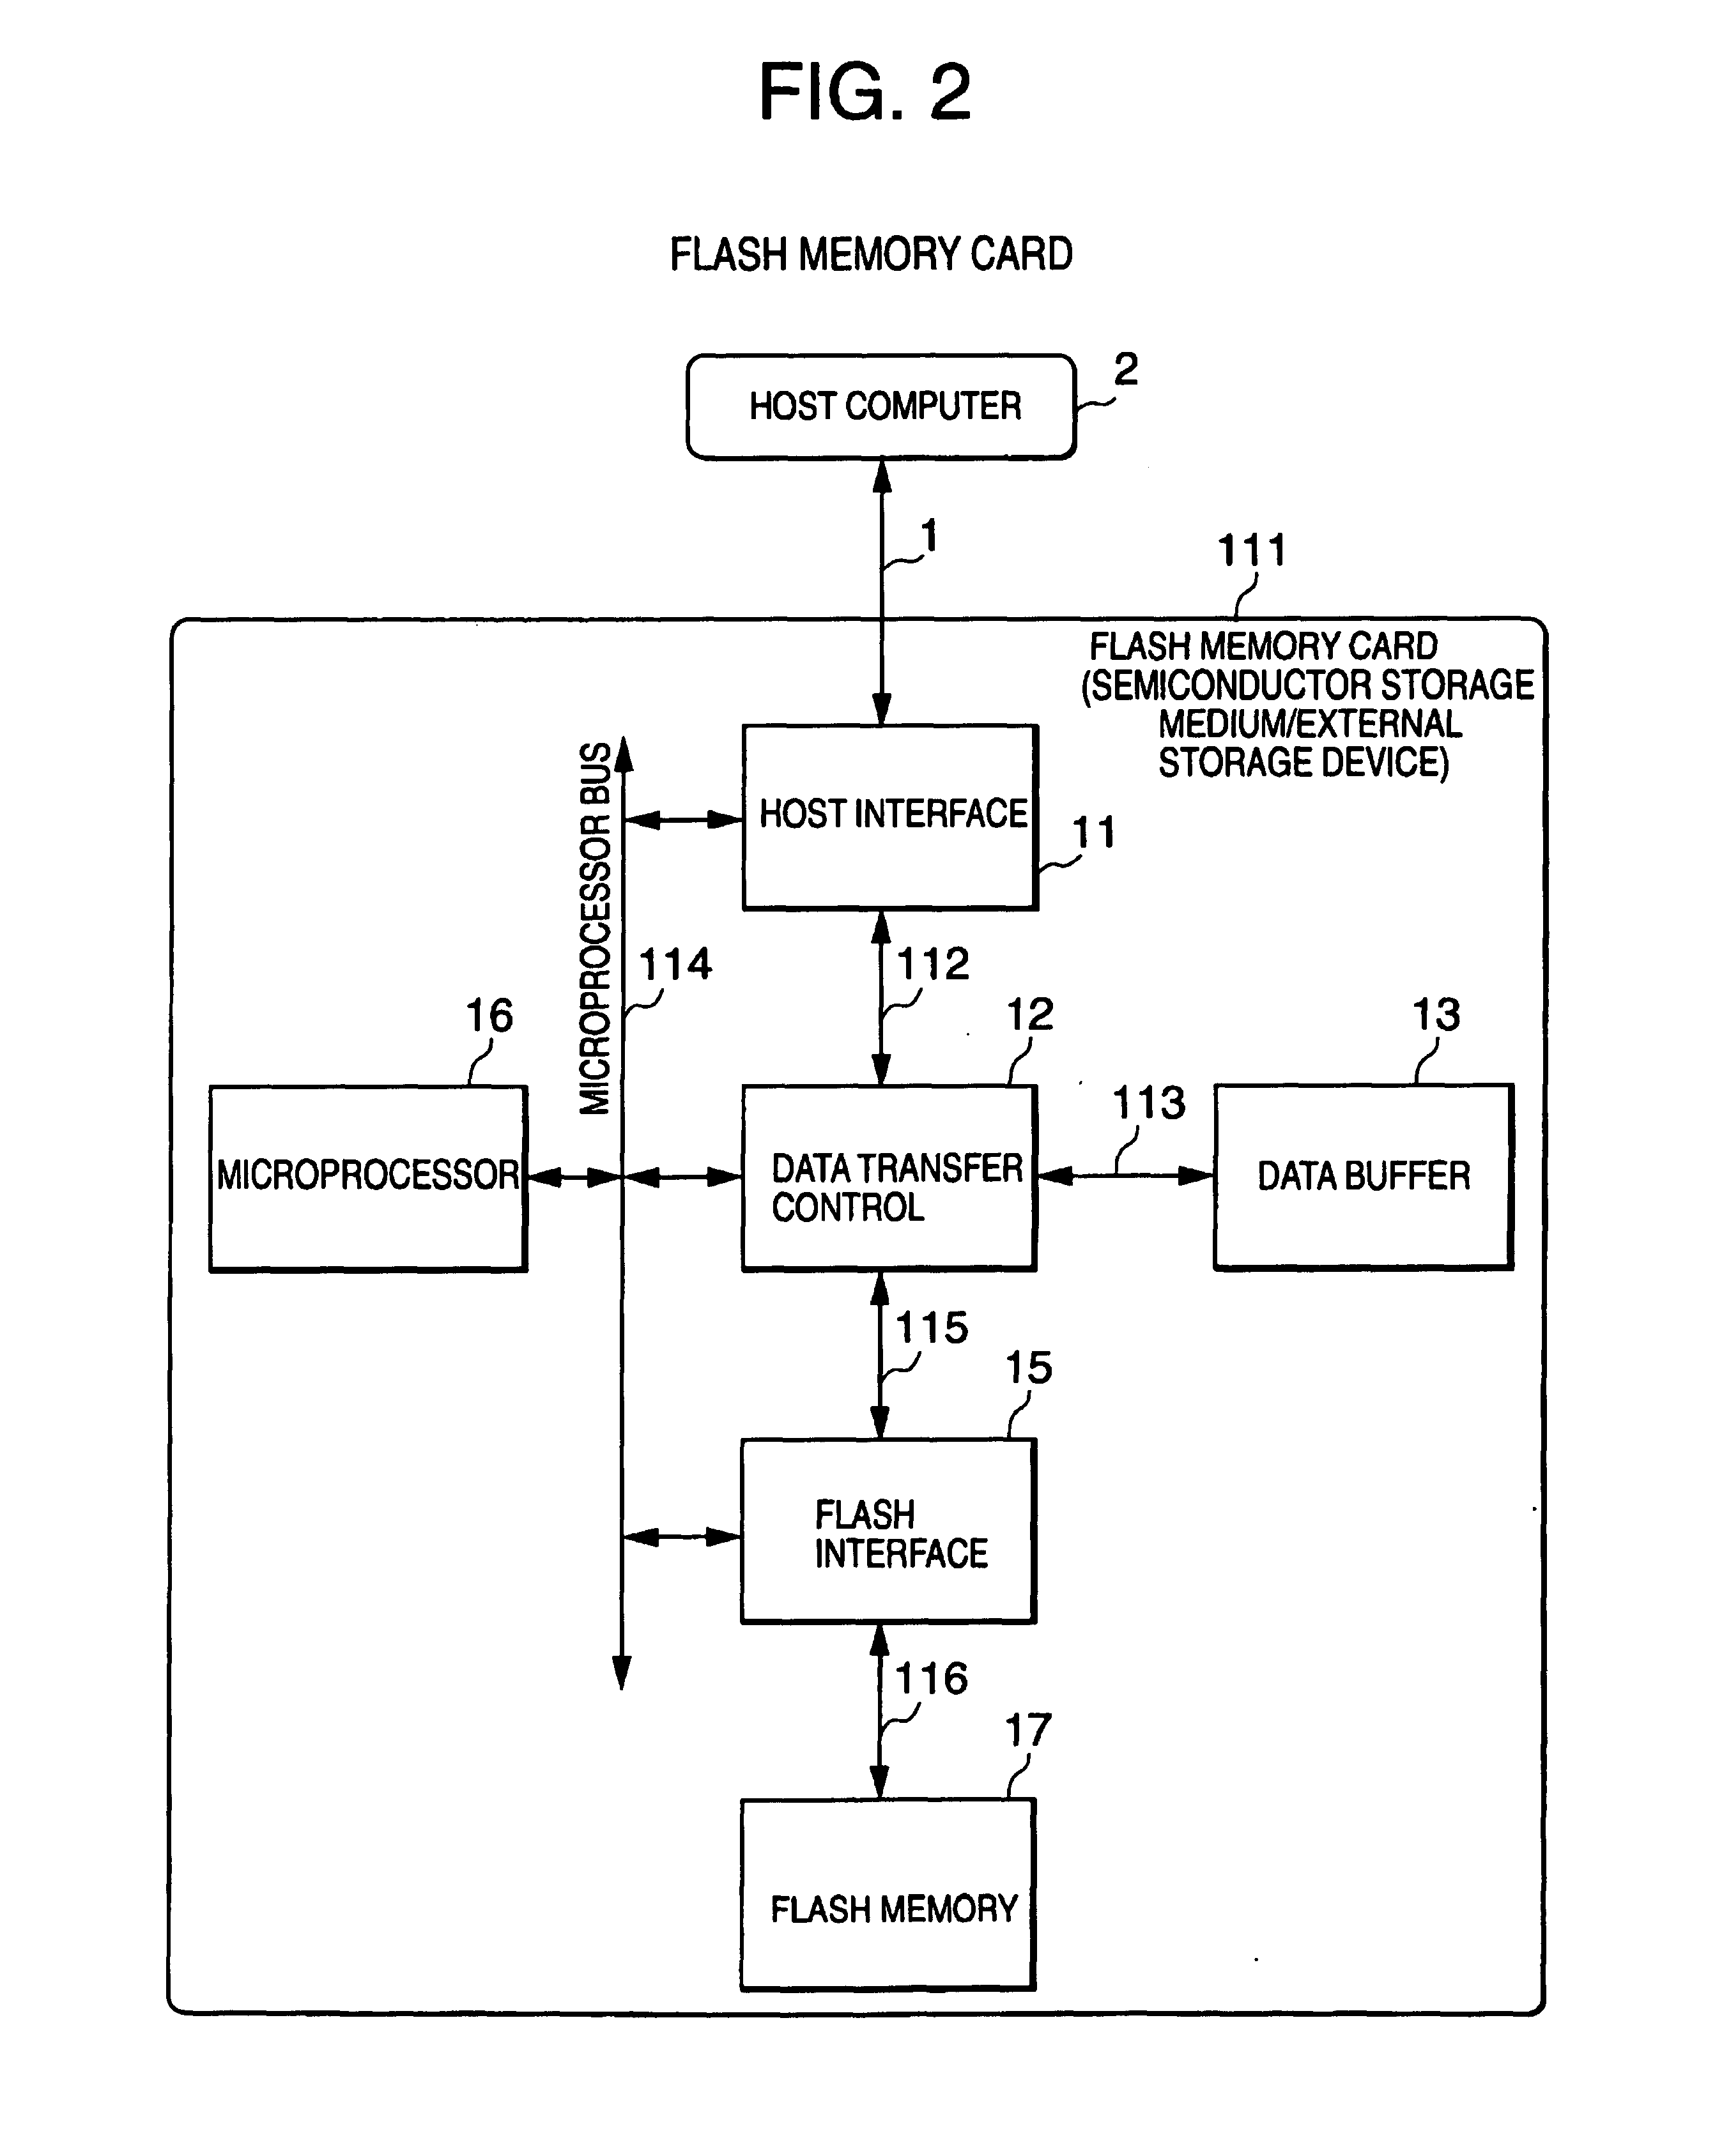 External storage device using non-volatile semiconductor memory